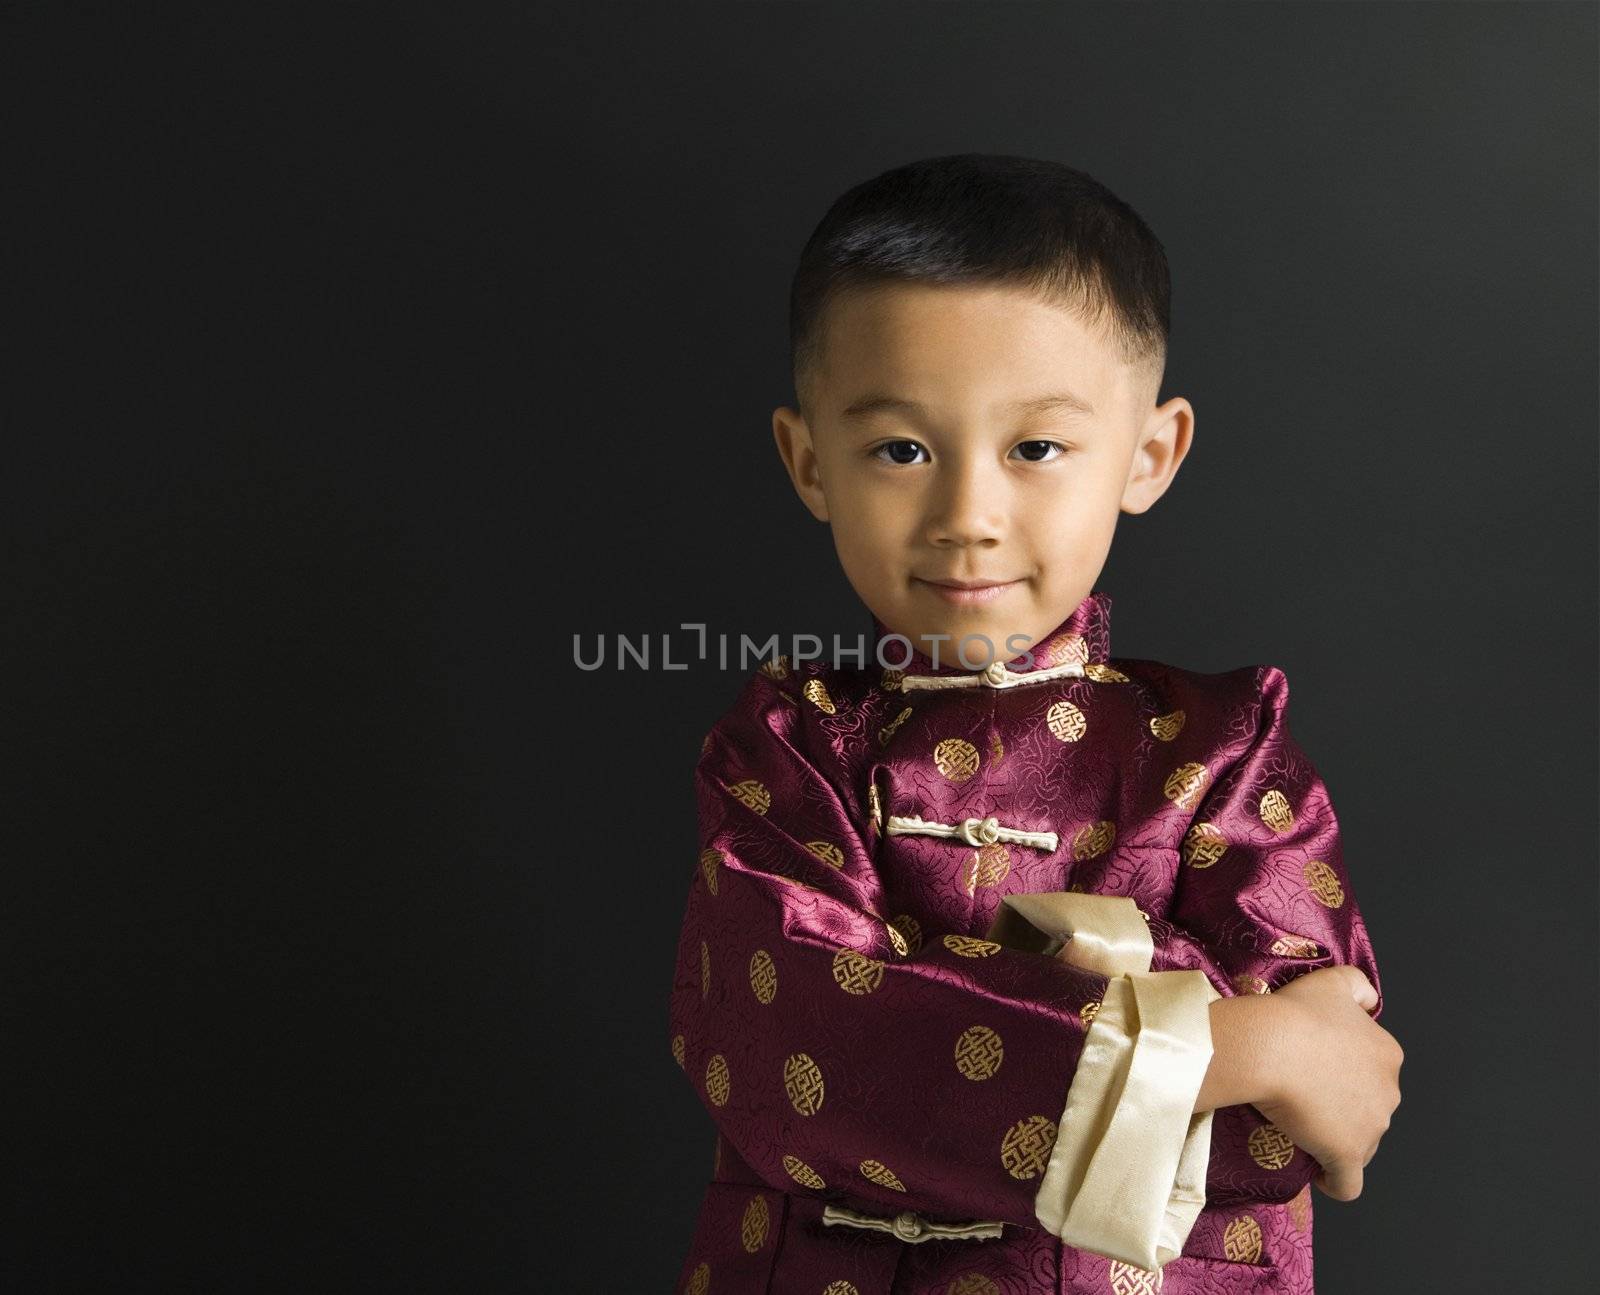 Asian boy in traditional attire standing against black background.